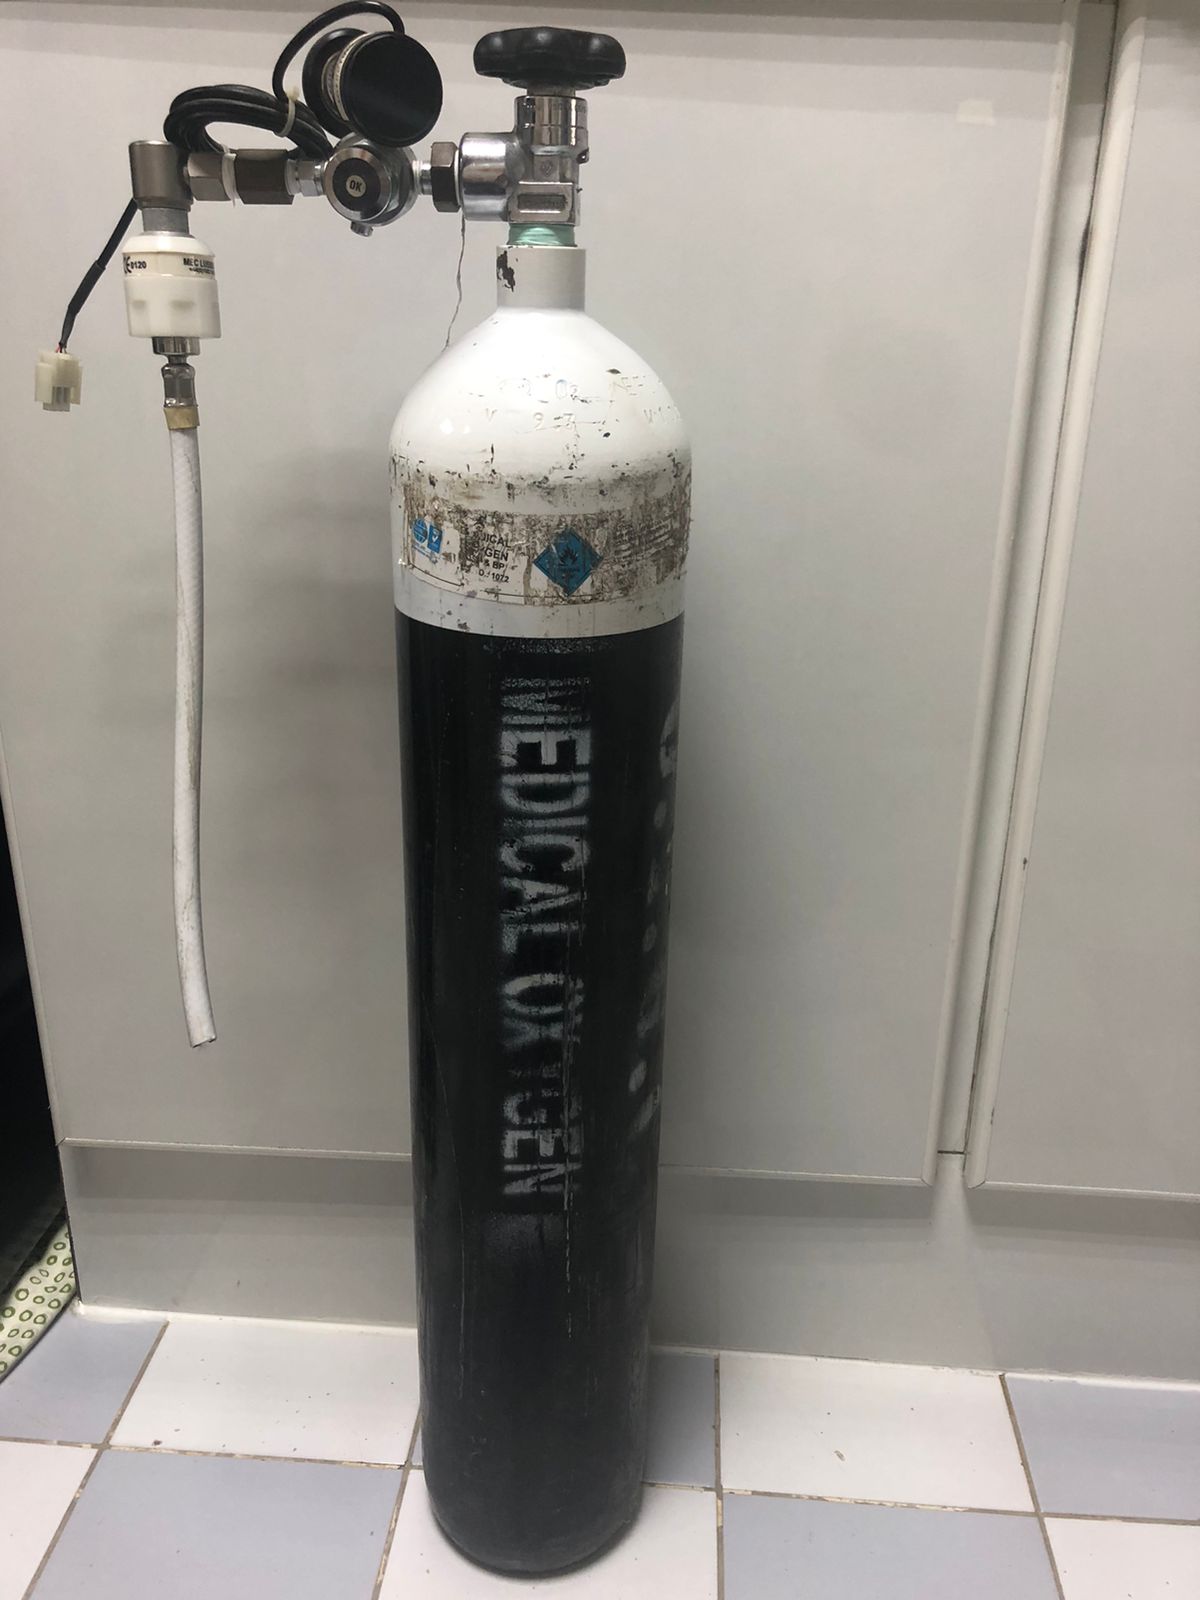 2 Oxygen cylinders with oxygen